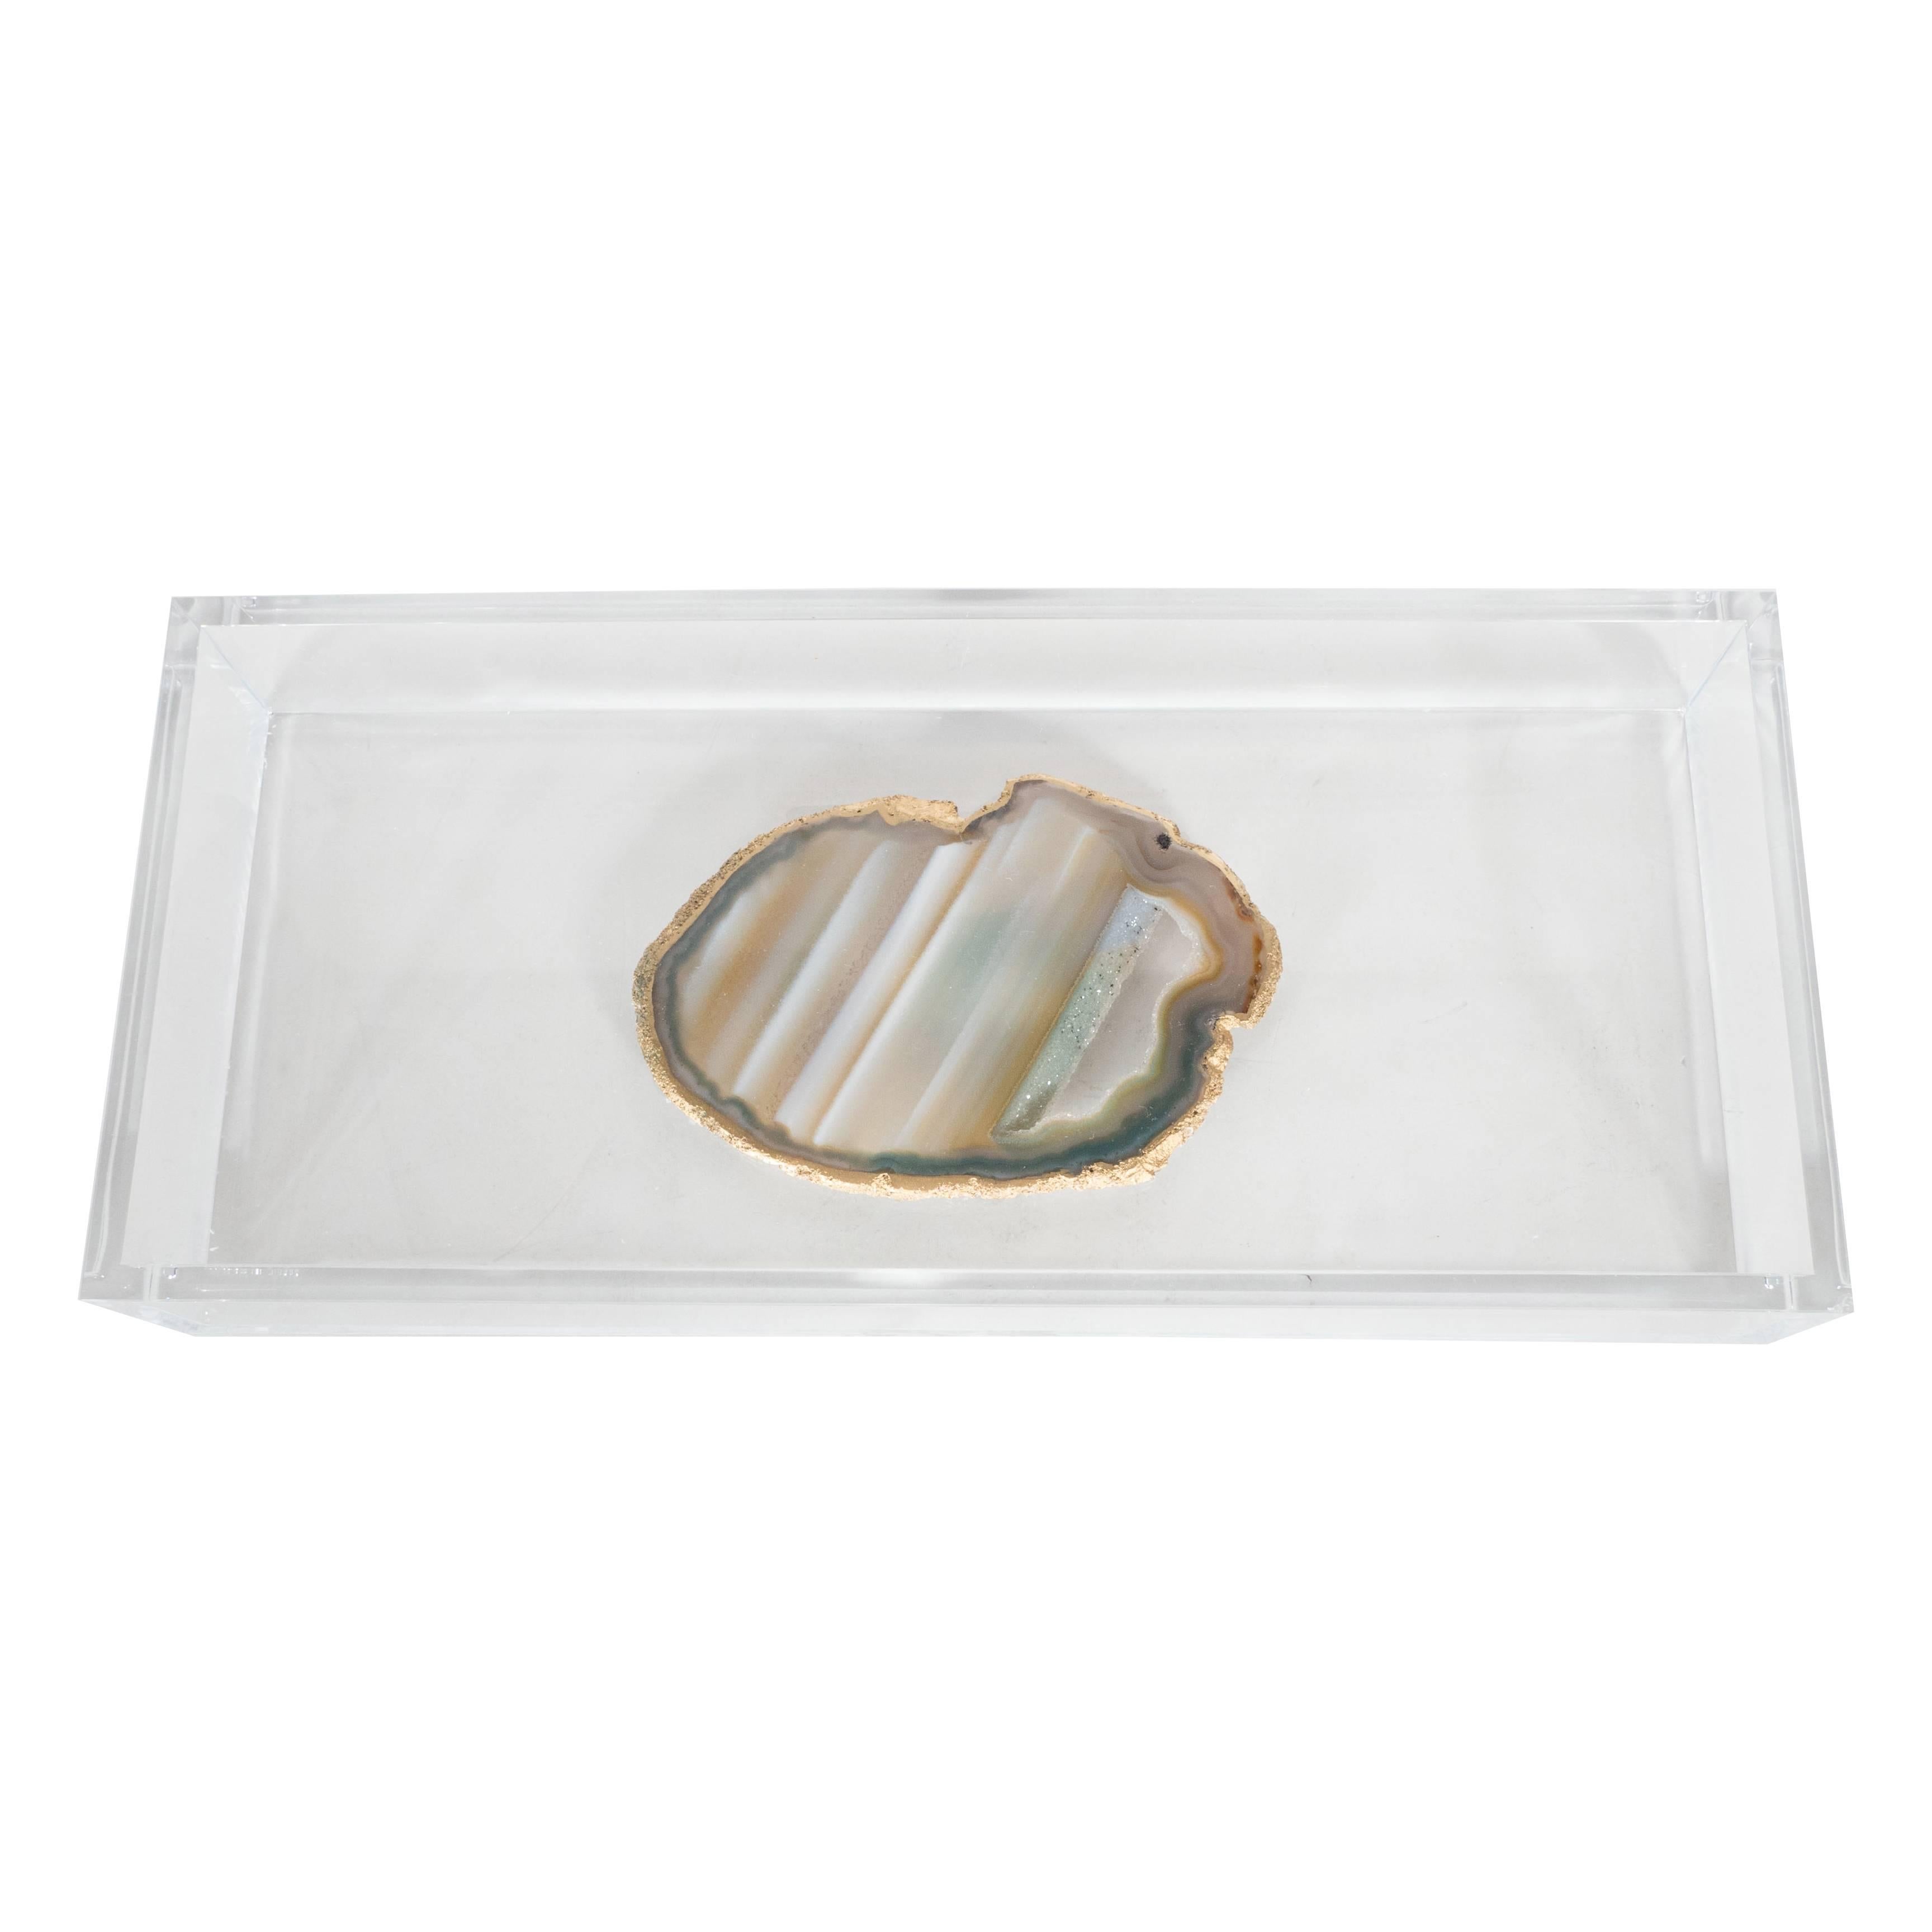 Modernist Organic Sliced Agate and Lucite Desk Tray or Catch All